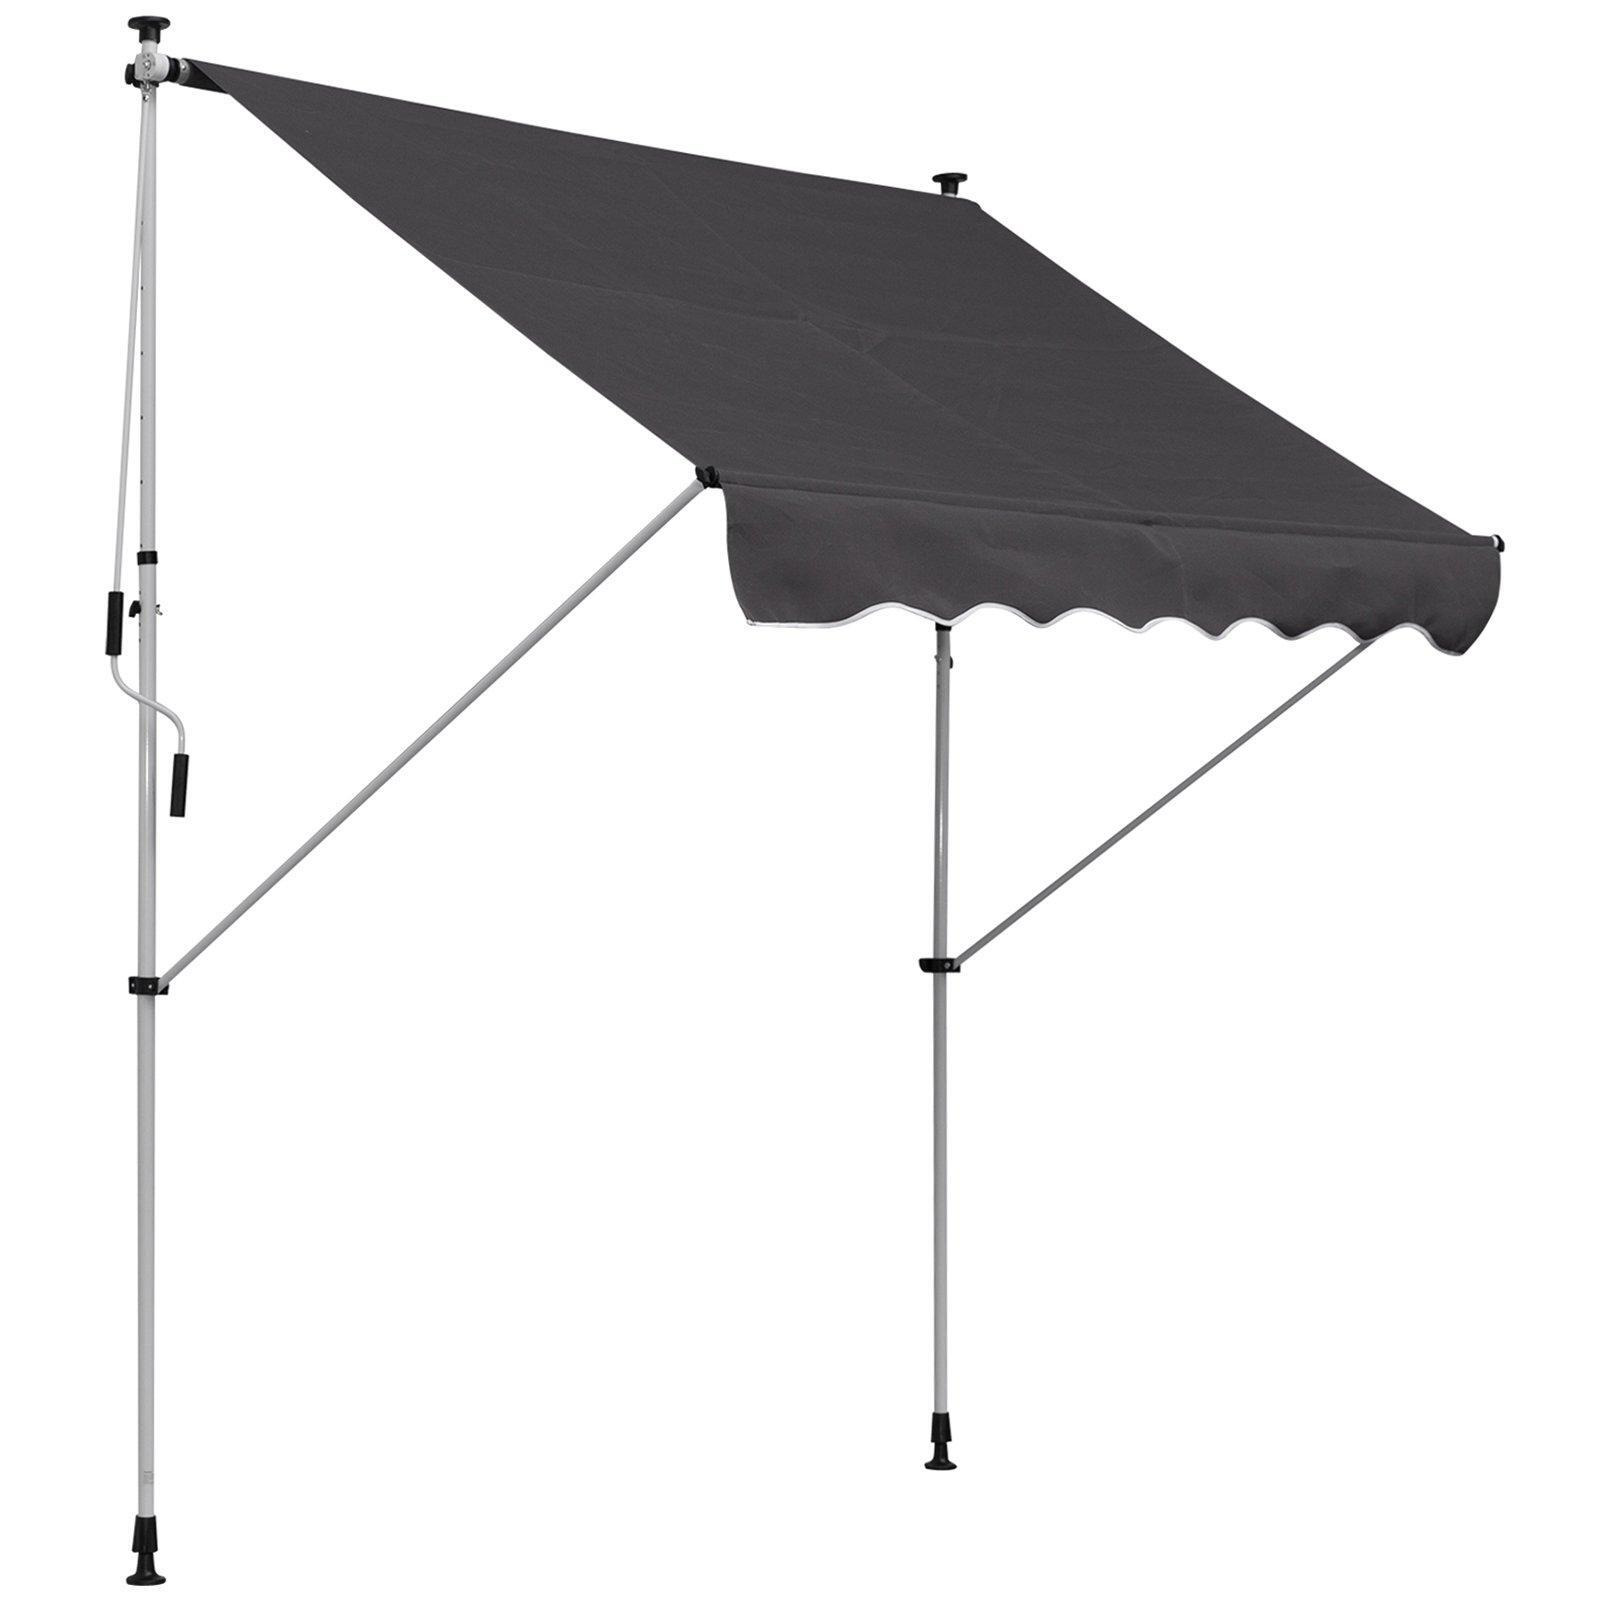 2x1.5m Manual Retractable Patio Awning Floor- to-ceiling Shade - image 1